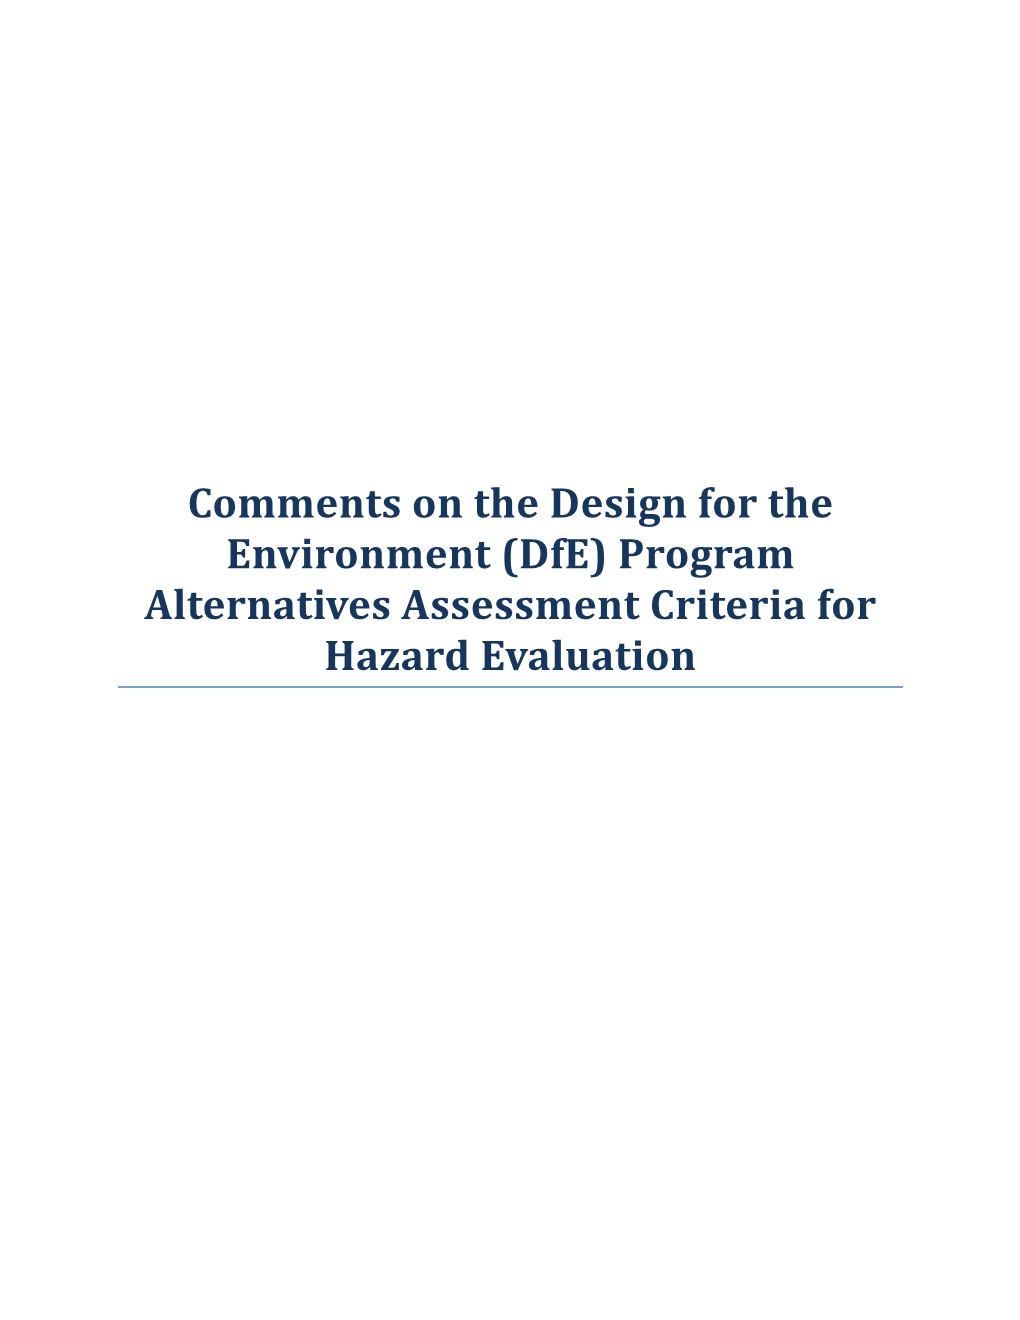 Comments on the Design for the Environment (Dfe) Program Alternatives Assessment Criteria for Hazard Evaluation